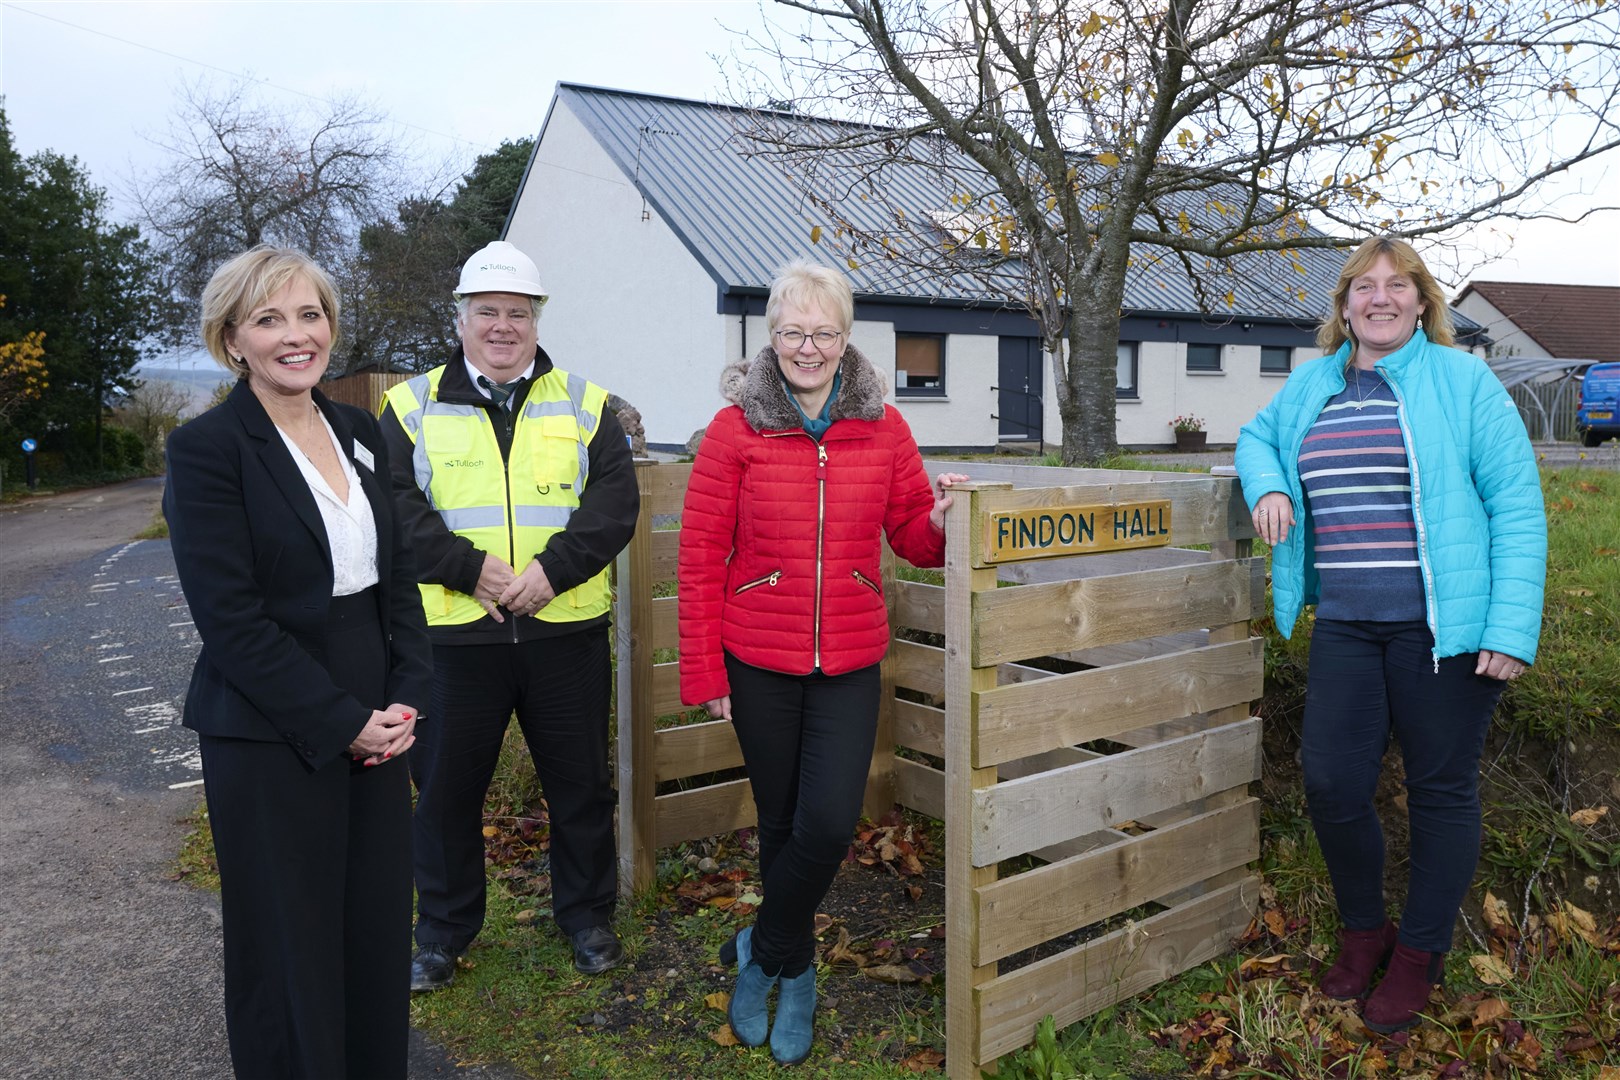 Hazel Bell and Jim Crawford, sales consultant and site manager of Tulloch Homes, with Barbara Gray and Sheila Robinson, treasurer and chair respectively of Findon Hall management committee